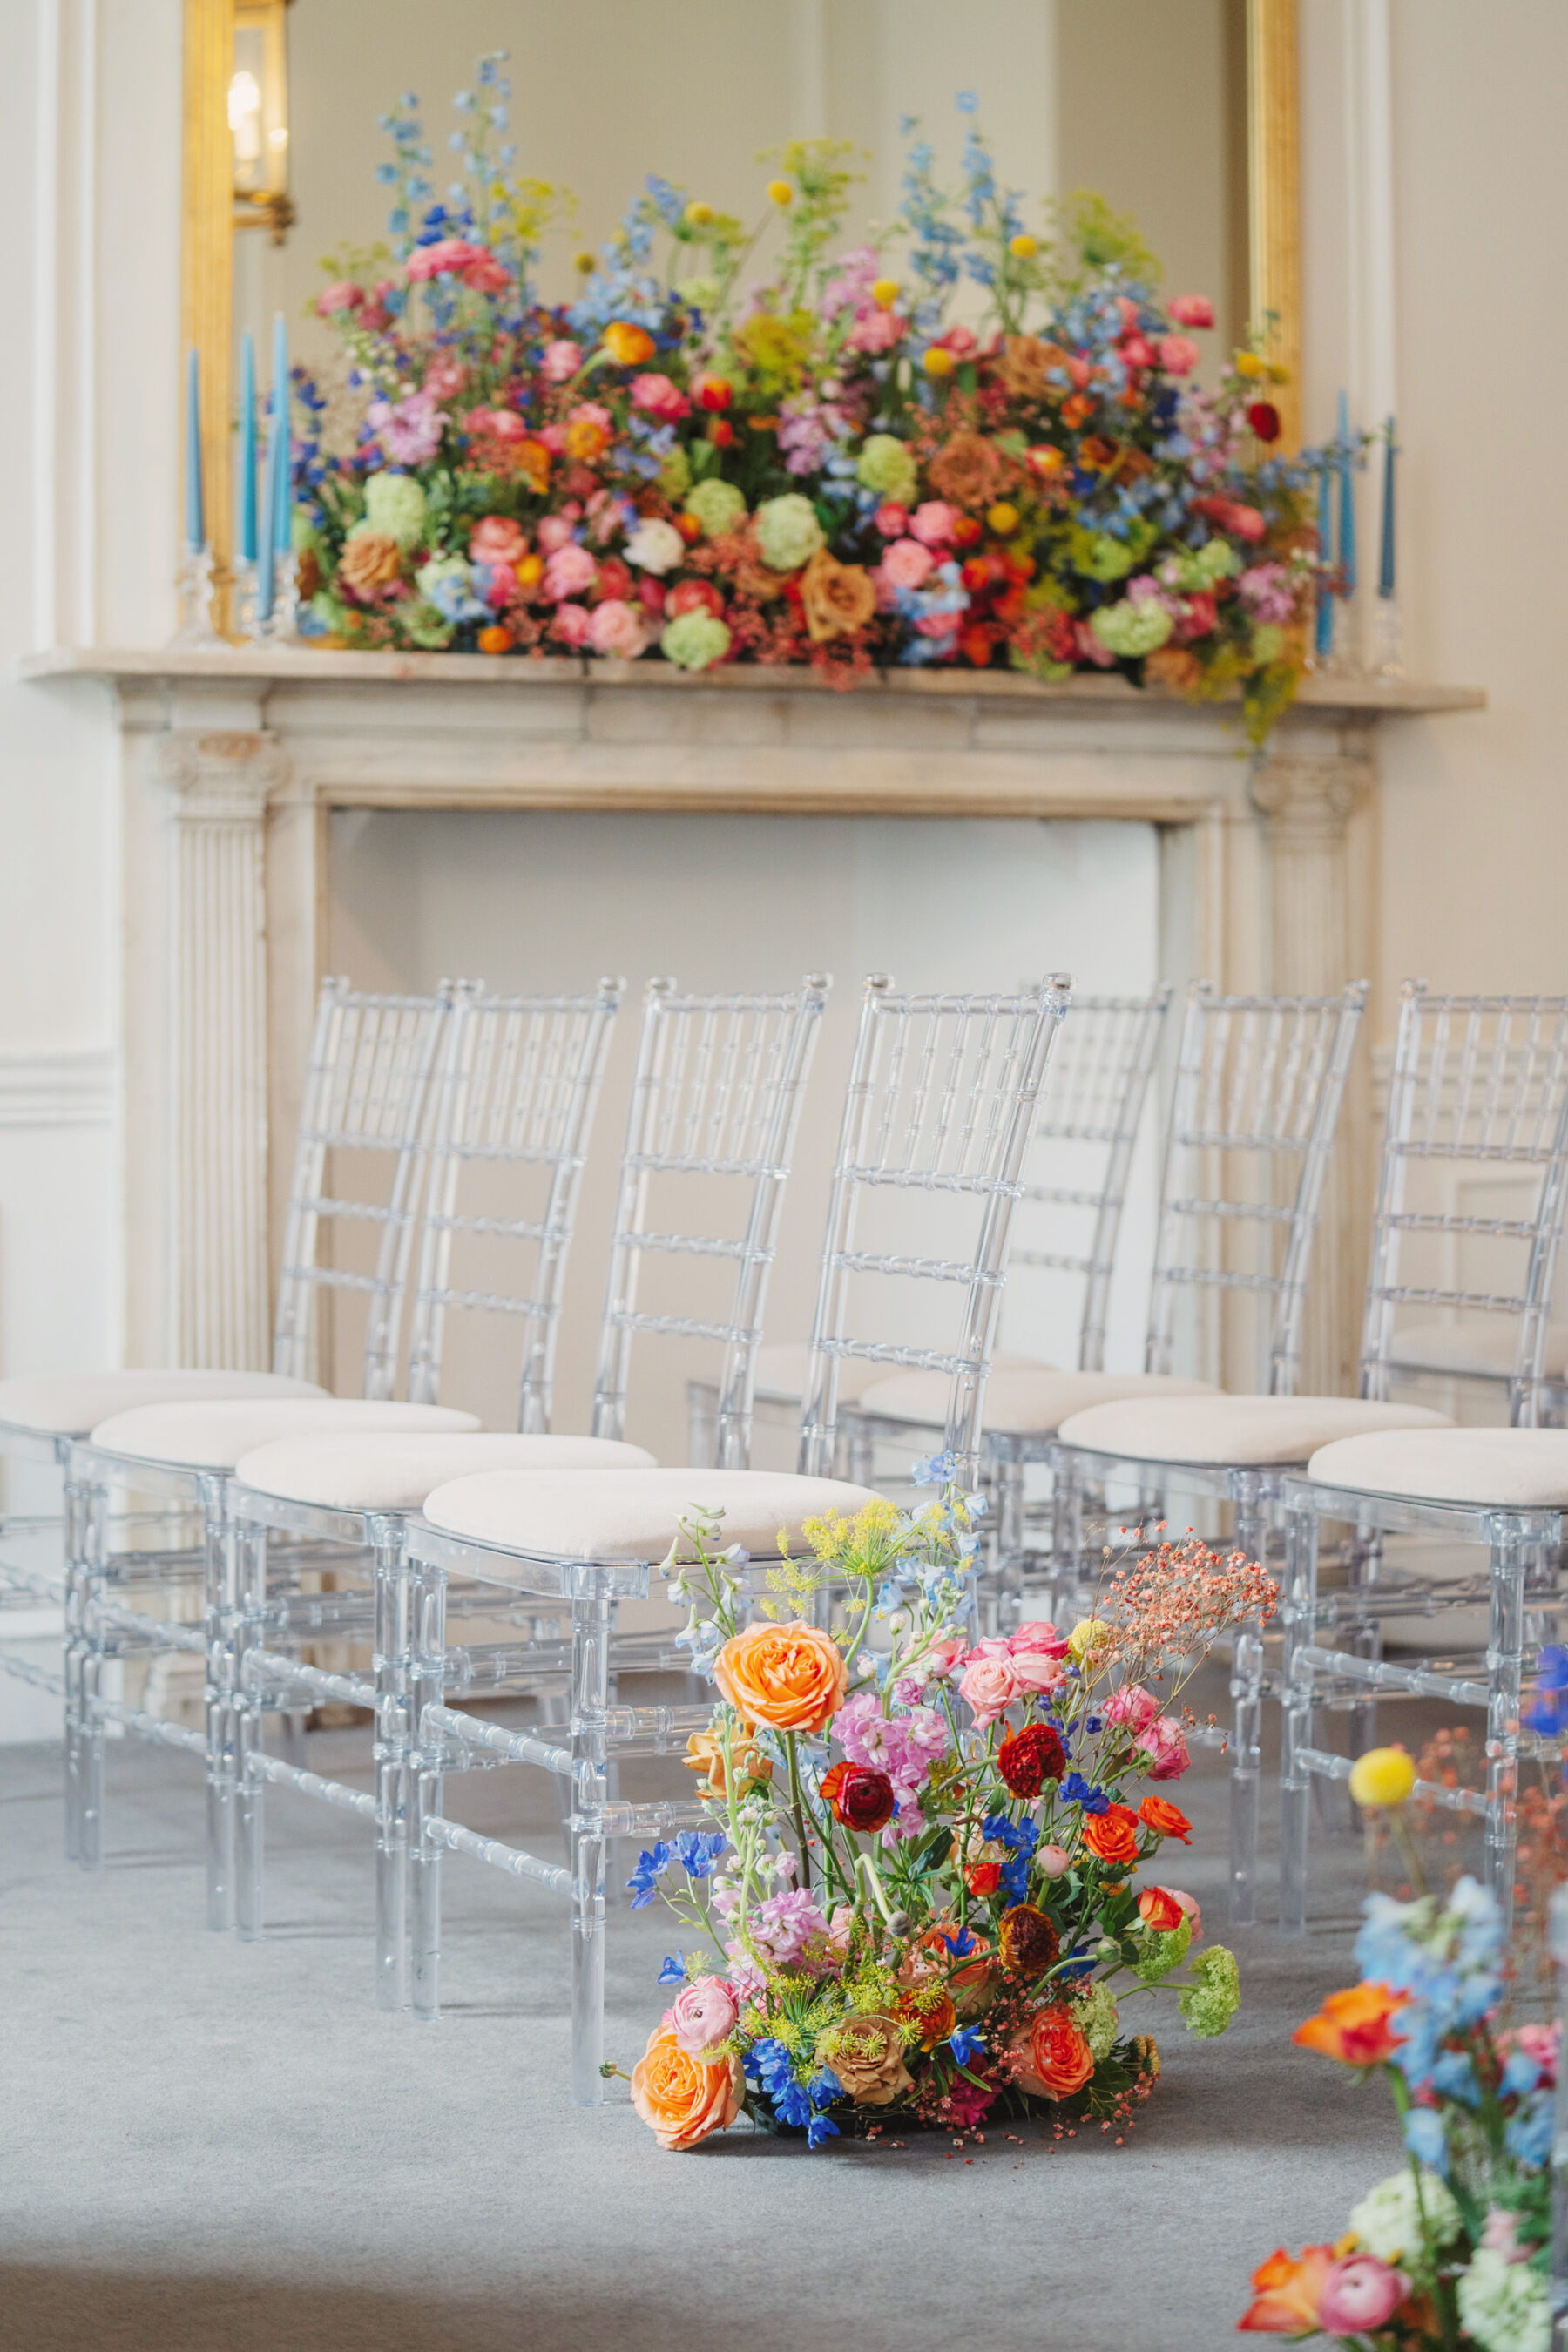 Bright and colourful wedding flowers decorating the end of the aisle and fireplace.